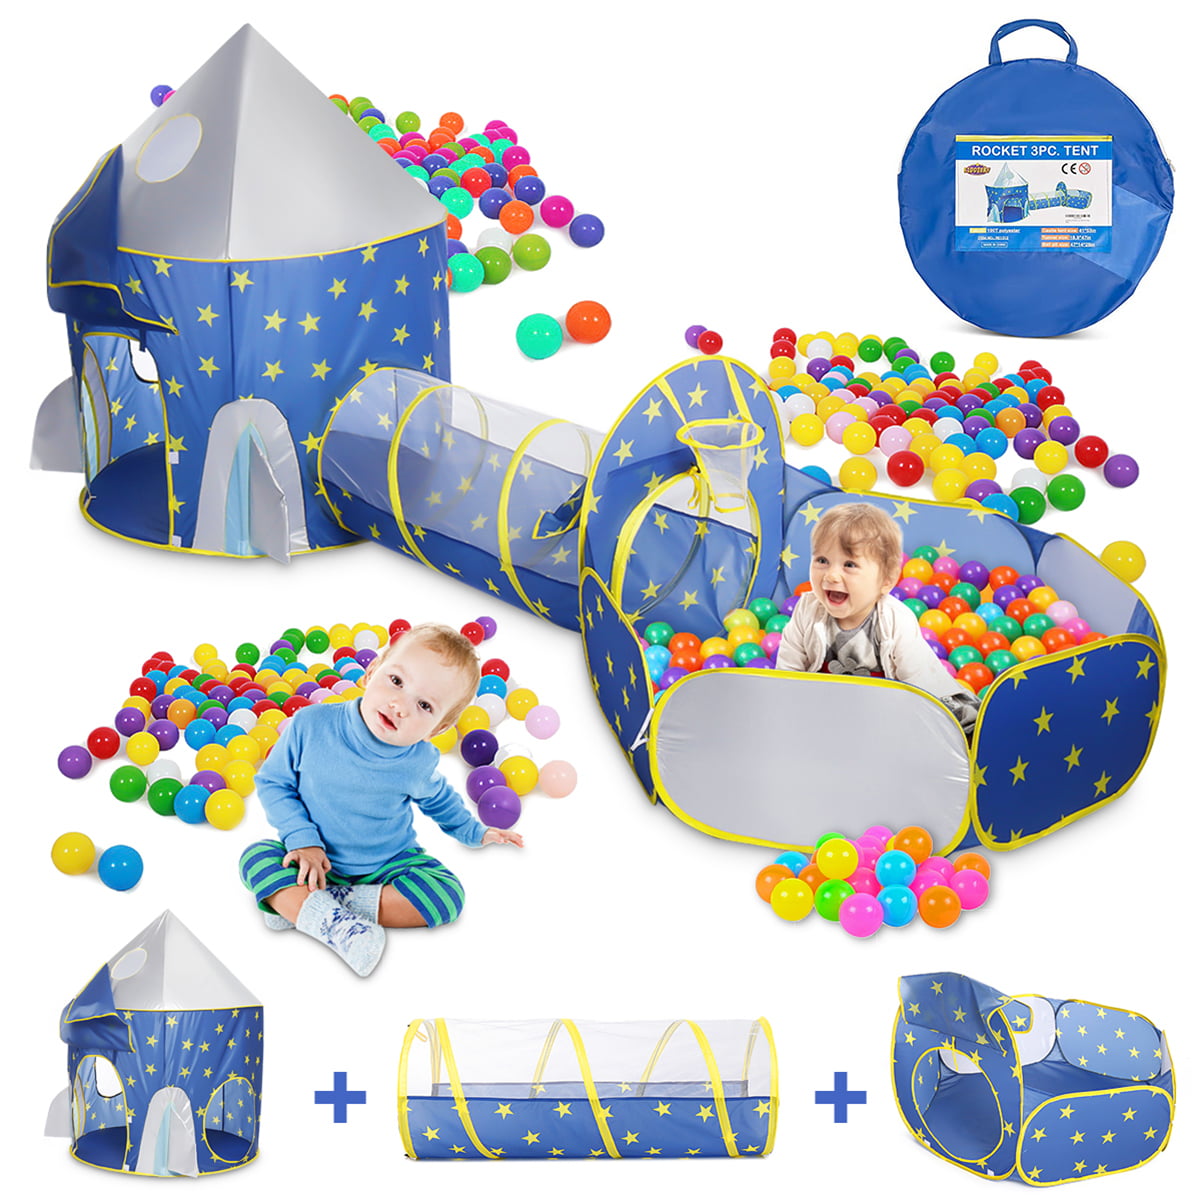 Indoor/Outdoor Playhouse Girls Babies and Toddlers Ship from USA Yuege 3 in 1 Pop Up Play Tent with Tunnel Ball Pit for Kids Boys Balls Not Included 